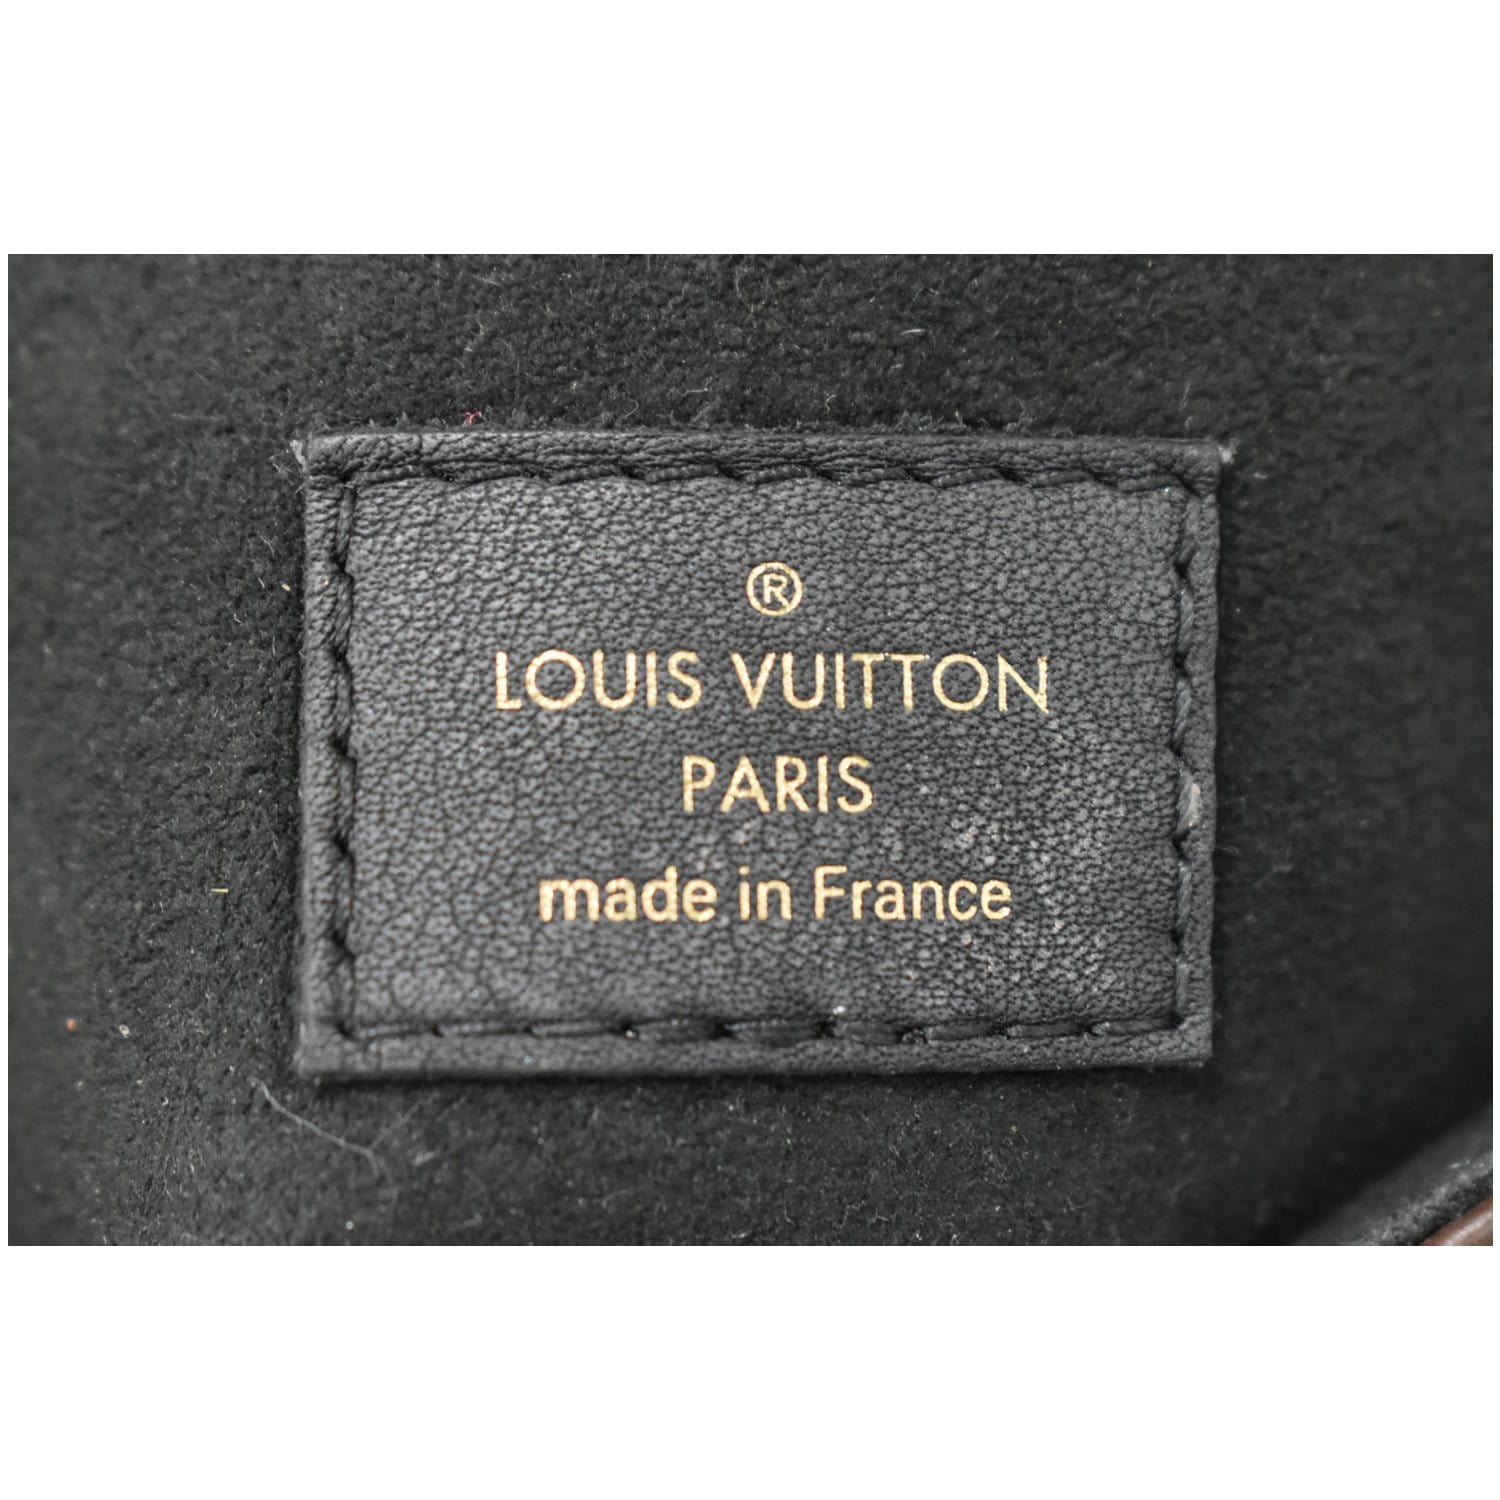 Louis Vuitton Locky Monogram BB Bleu Jean in Coated Canvas/Leather